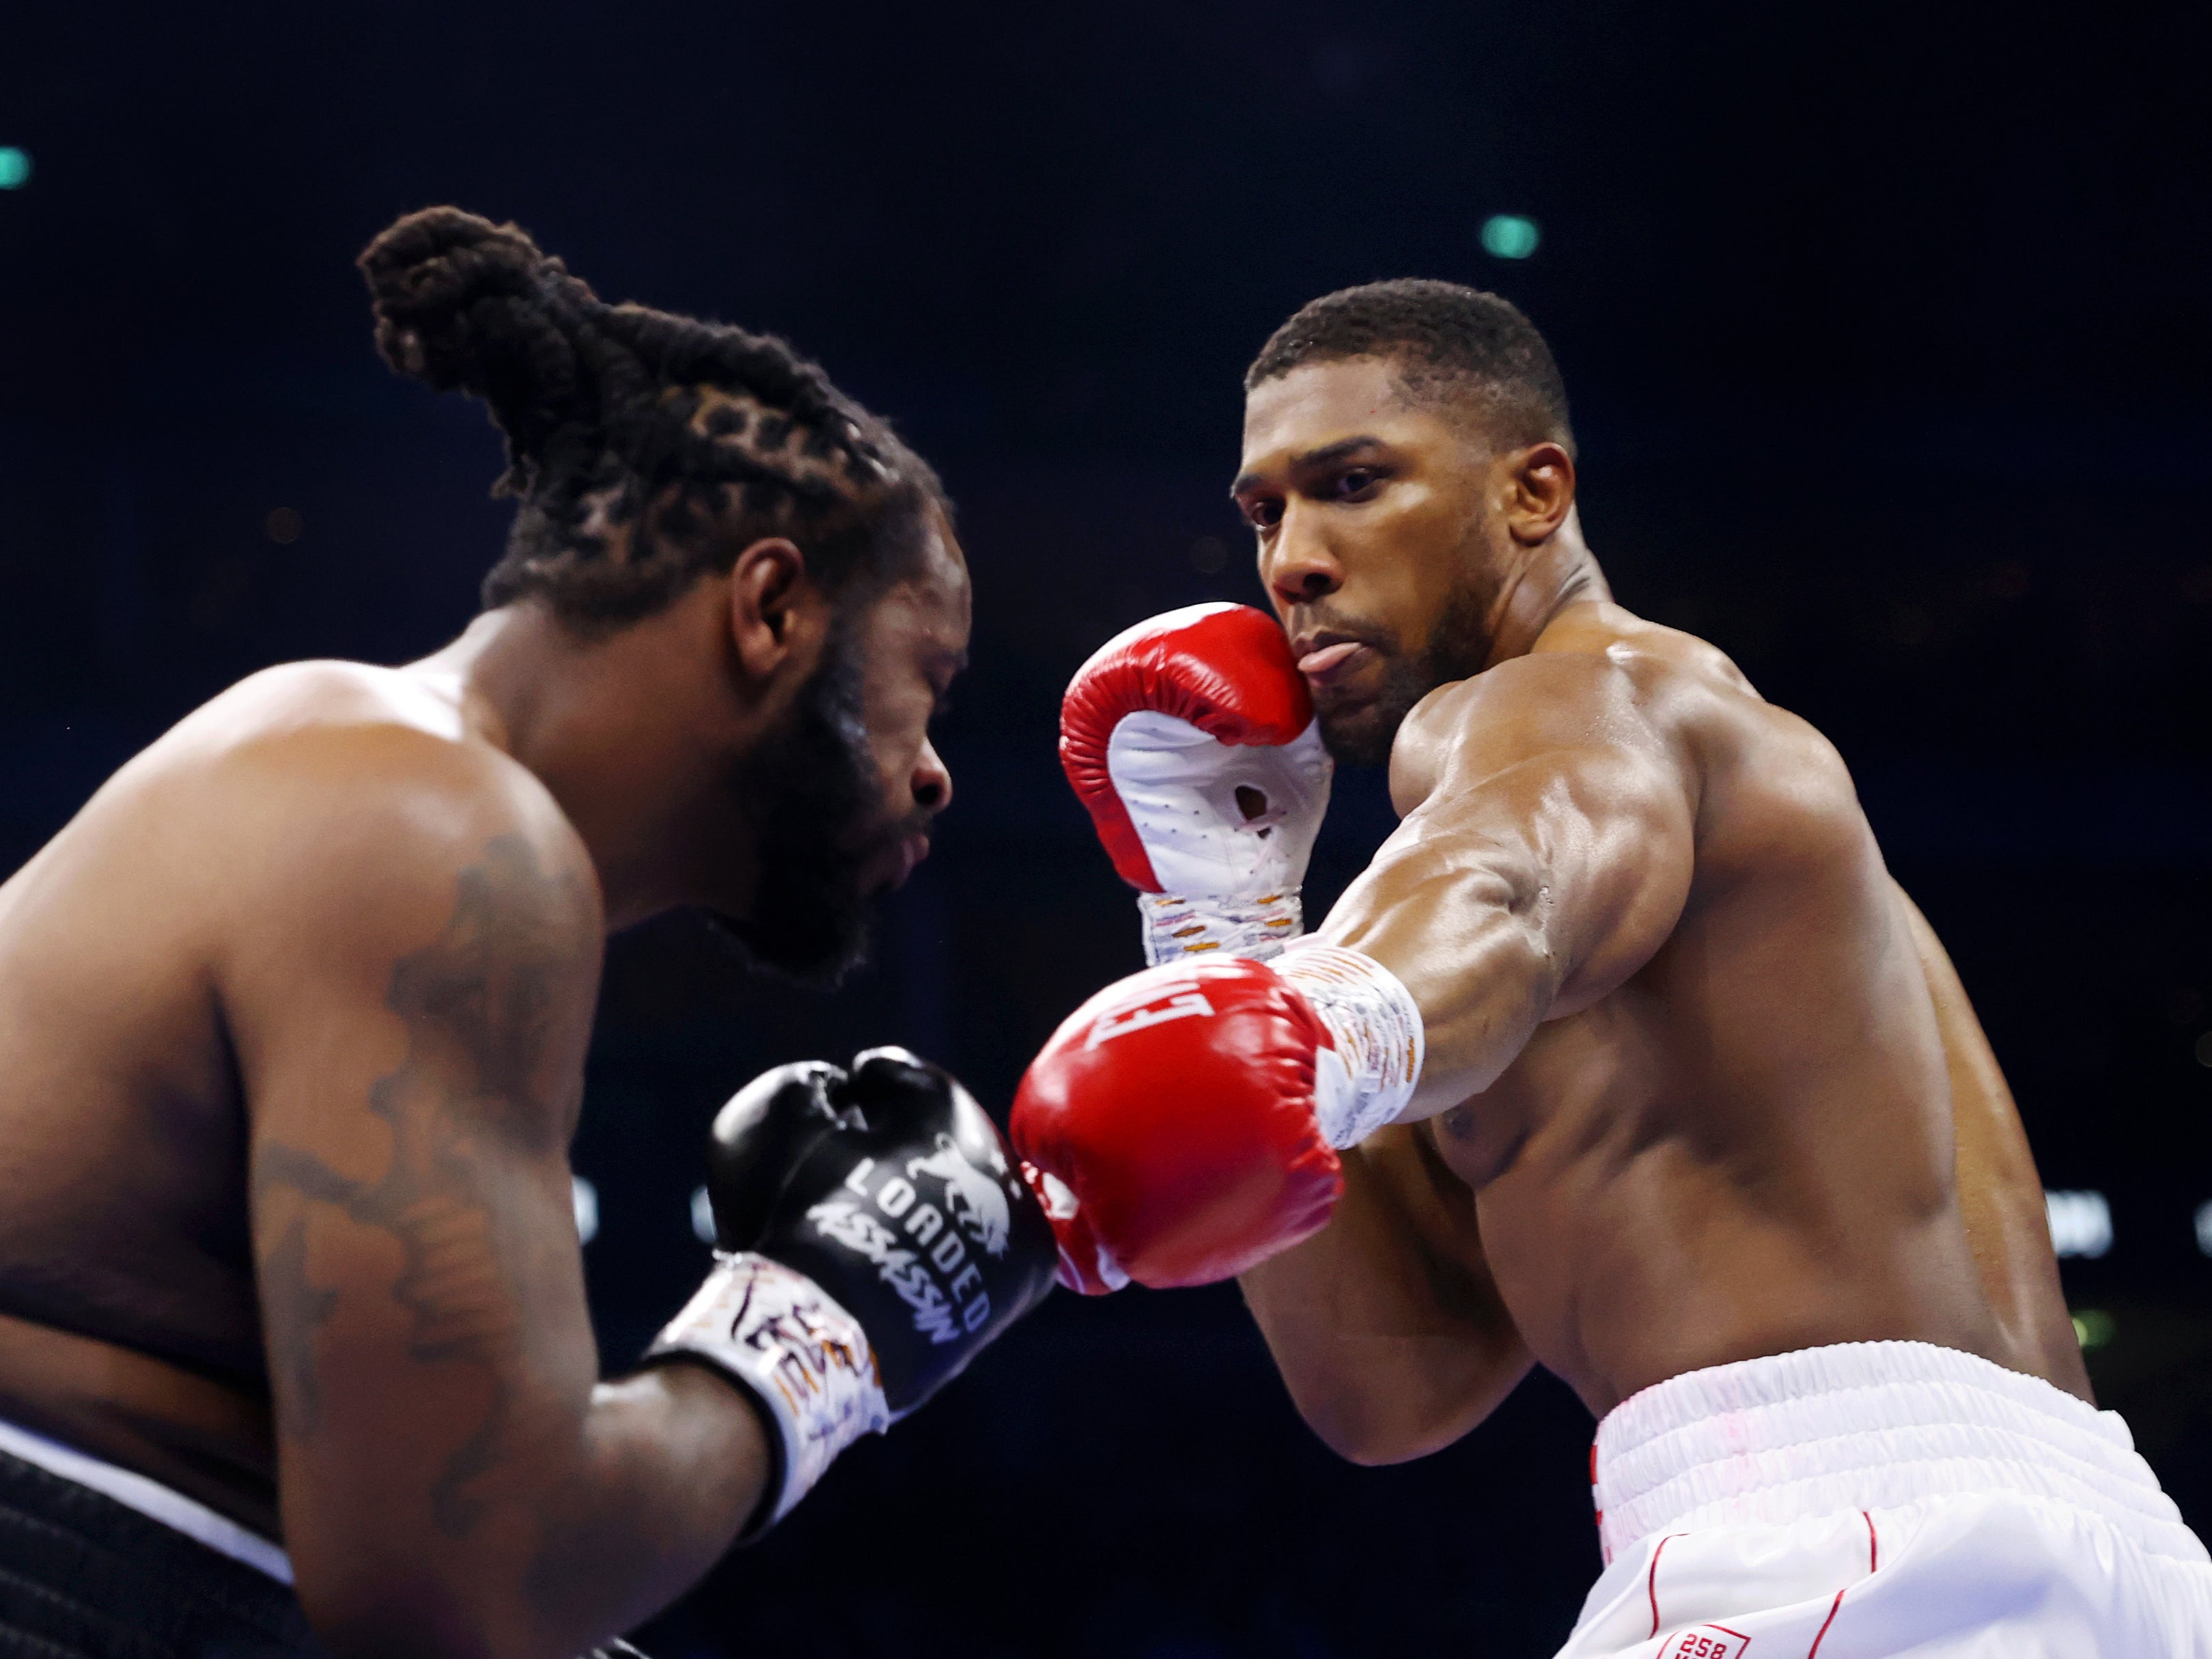 Joshua struggled to land the right uppercut, which is the perfect punch for a shorter opponent like Jermaine Franklin, and needed to let his fists go in bunches of punches